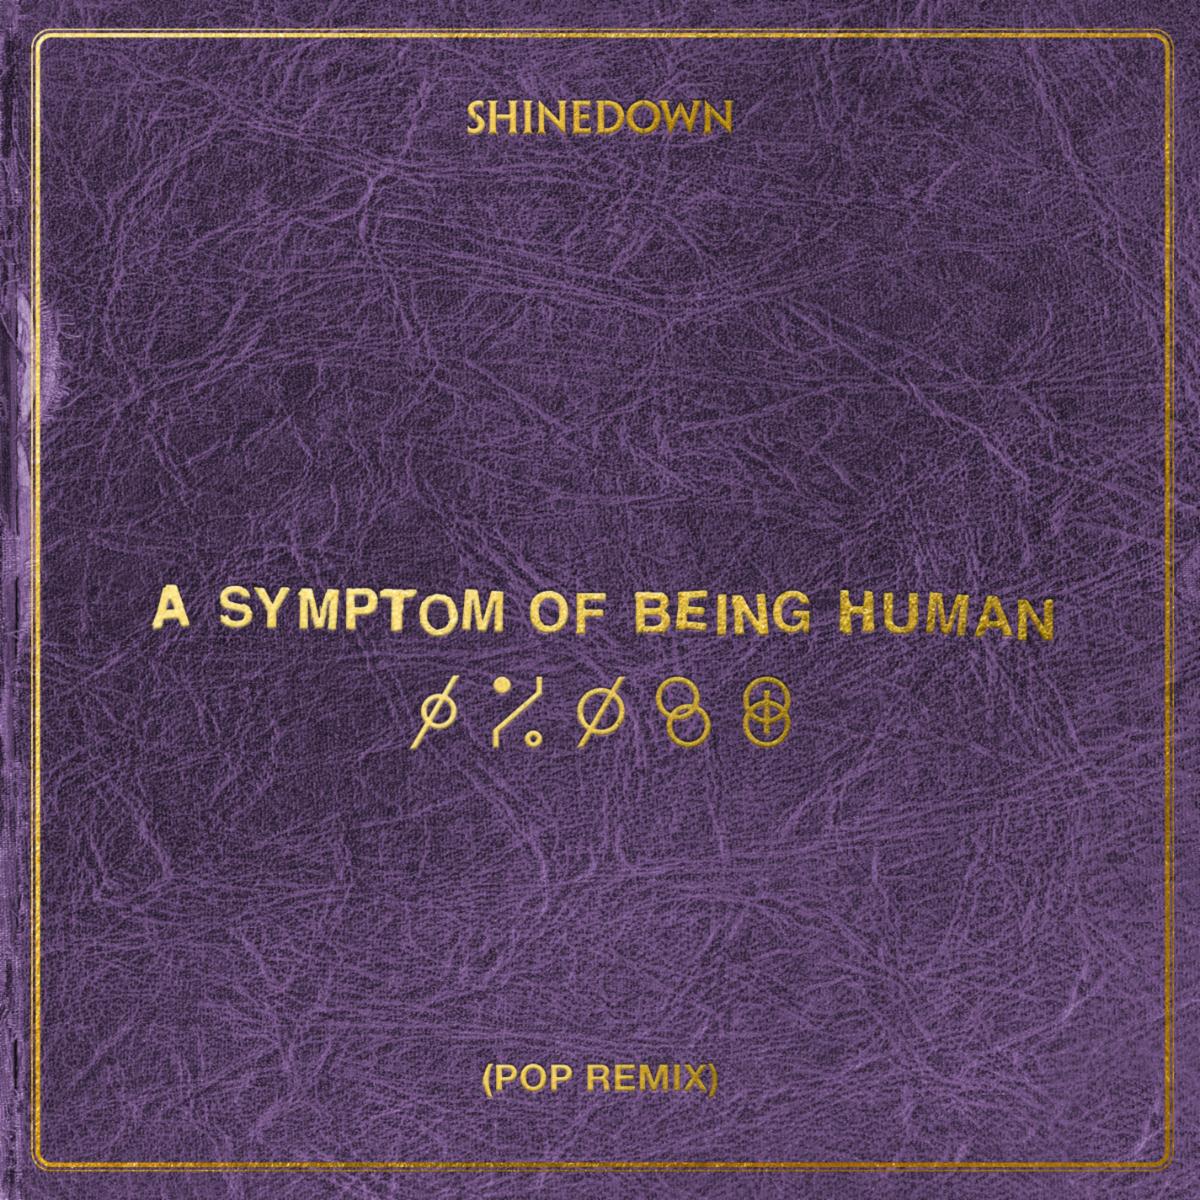 Shinedown Releases "A Symptom Of Being Human (Pop Remix)"